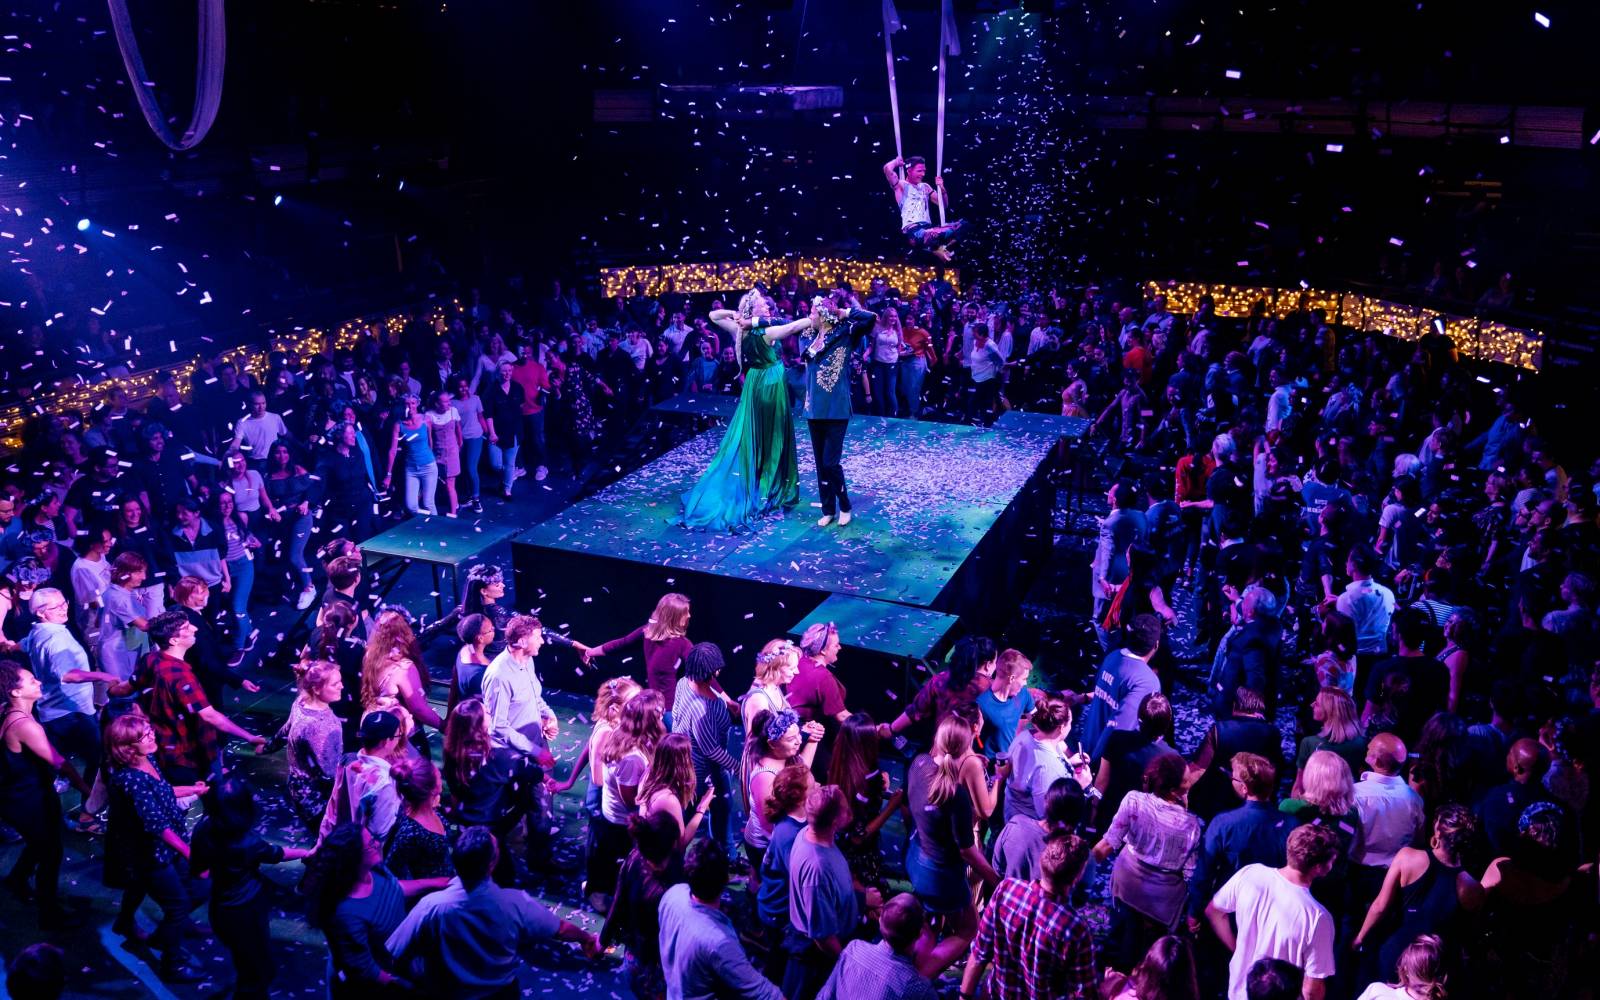 Gwendoline Christie (Titania) and Oliver Chris (Oberon) dance together under falling confetti, surrounded by a crowd